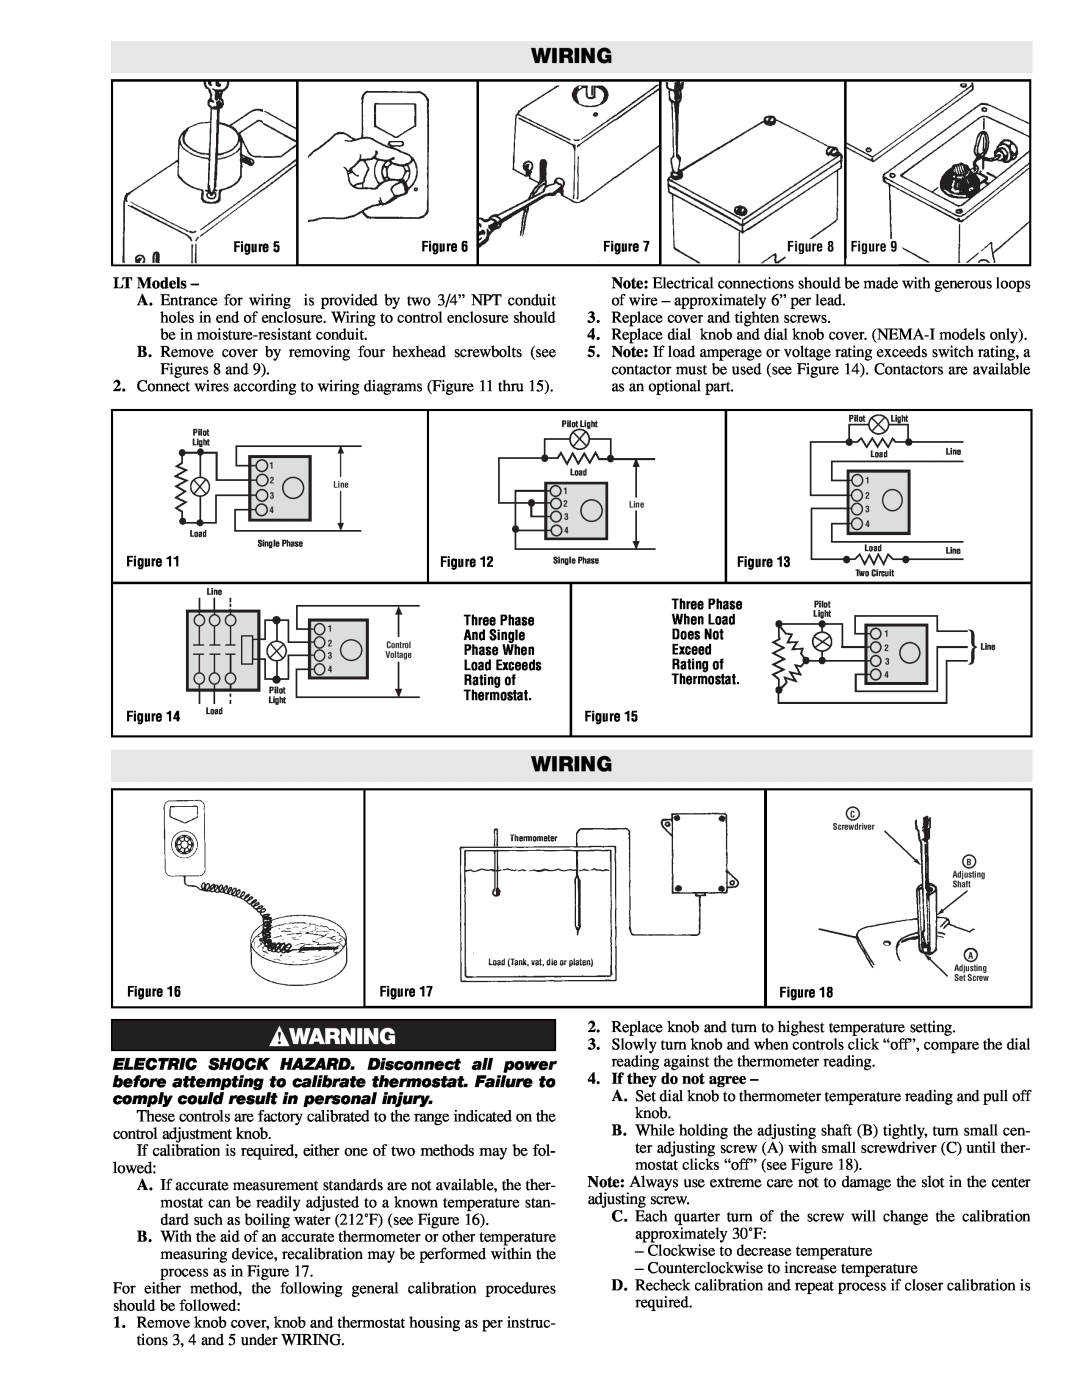 Chromalox PK405-18 installation instructions Wiring, LT Models, If they do not agree 